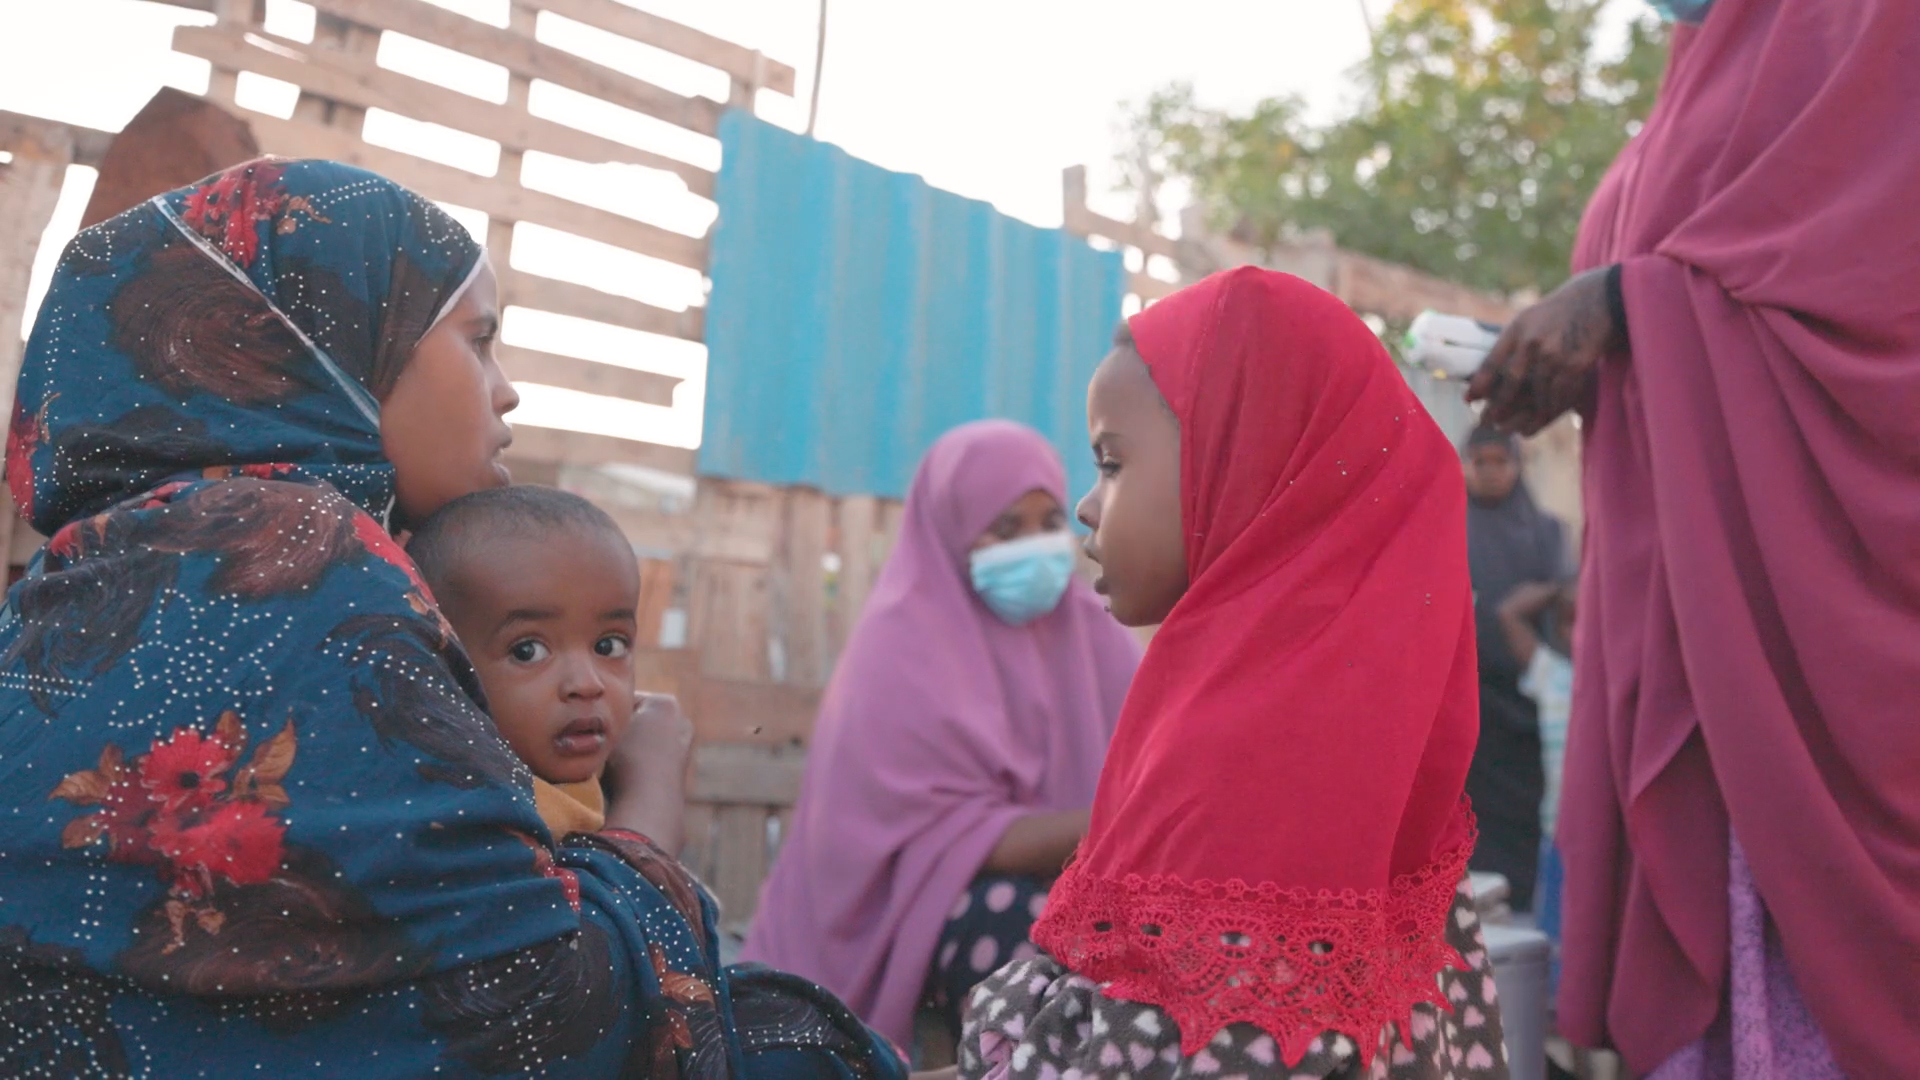 The PharmaJet Tropis System was previously used in the Berbera Region of Somaliland where researchers found needle-free administration of fIPV had the potential to reach many more children as it could be implemented faster than other immunization methods.